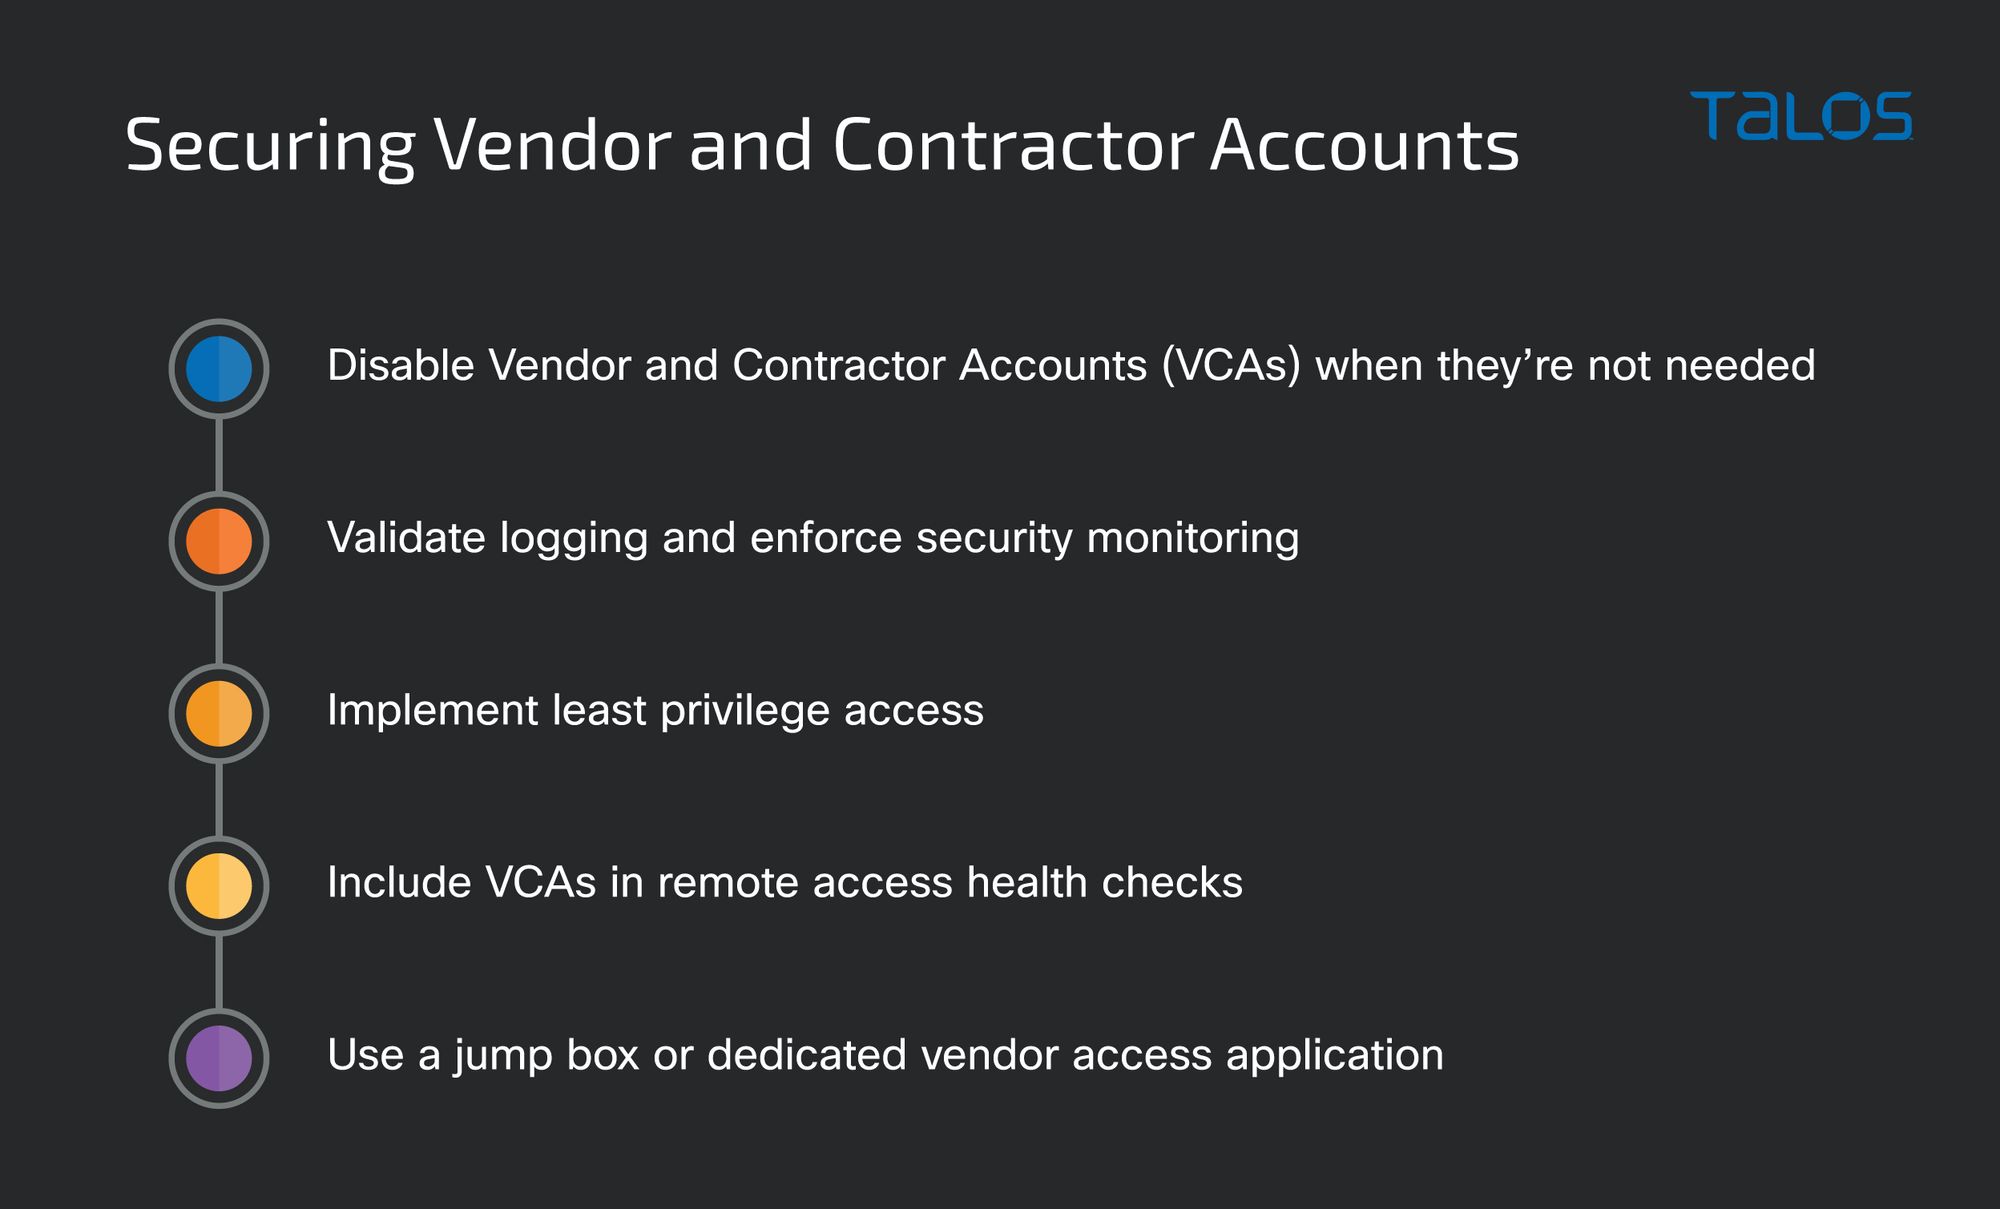 Adversaries increasingly using vendor and contractor accounts to infiltrate networks